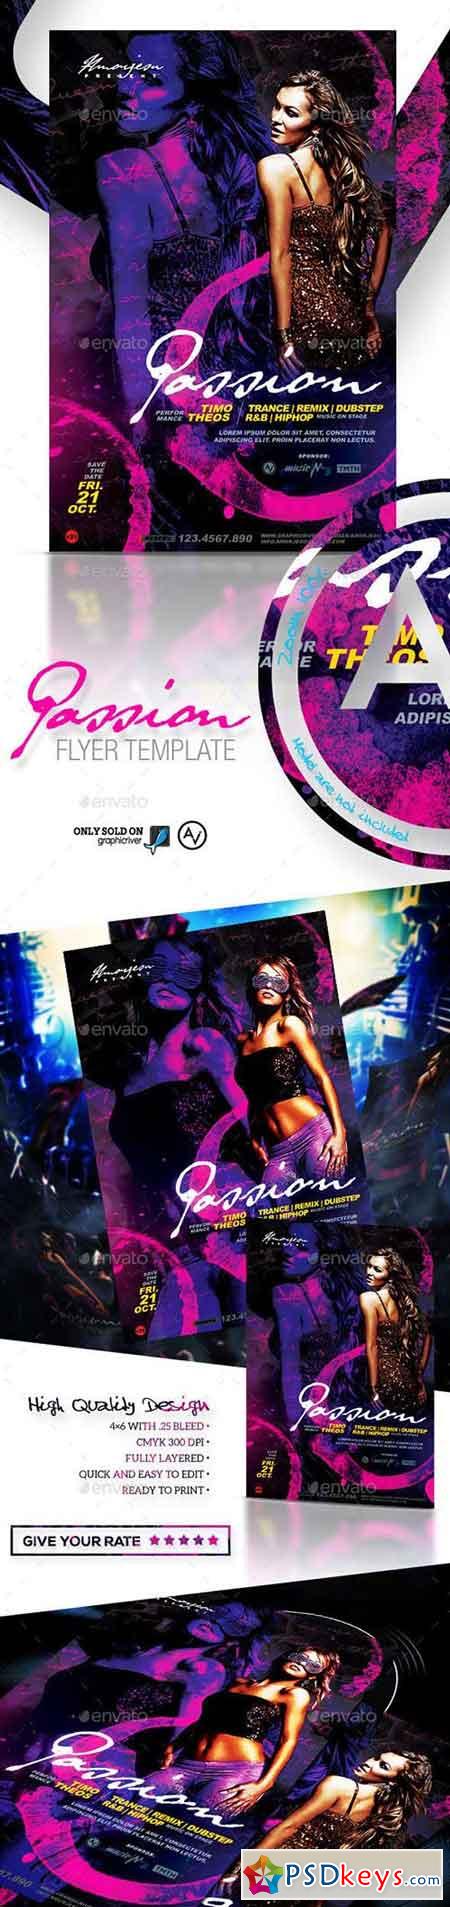 Passion Flyer Template 12047025